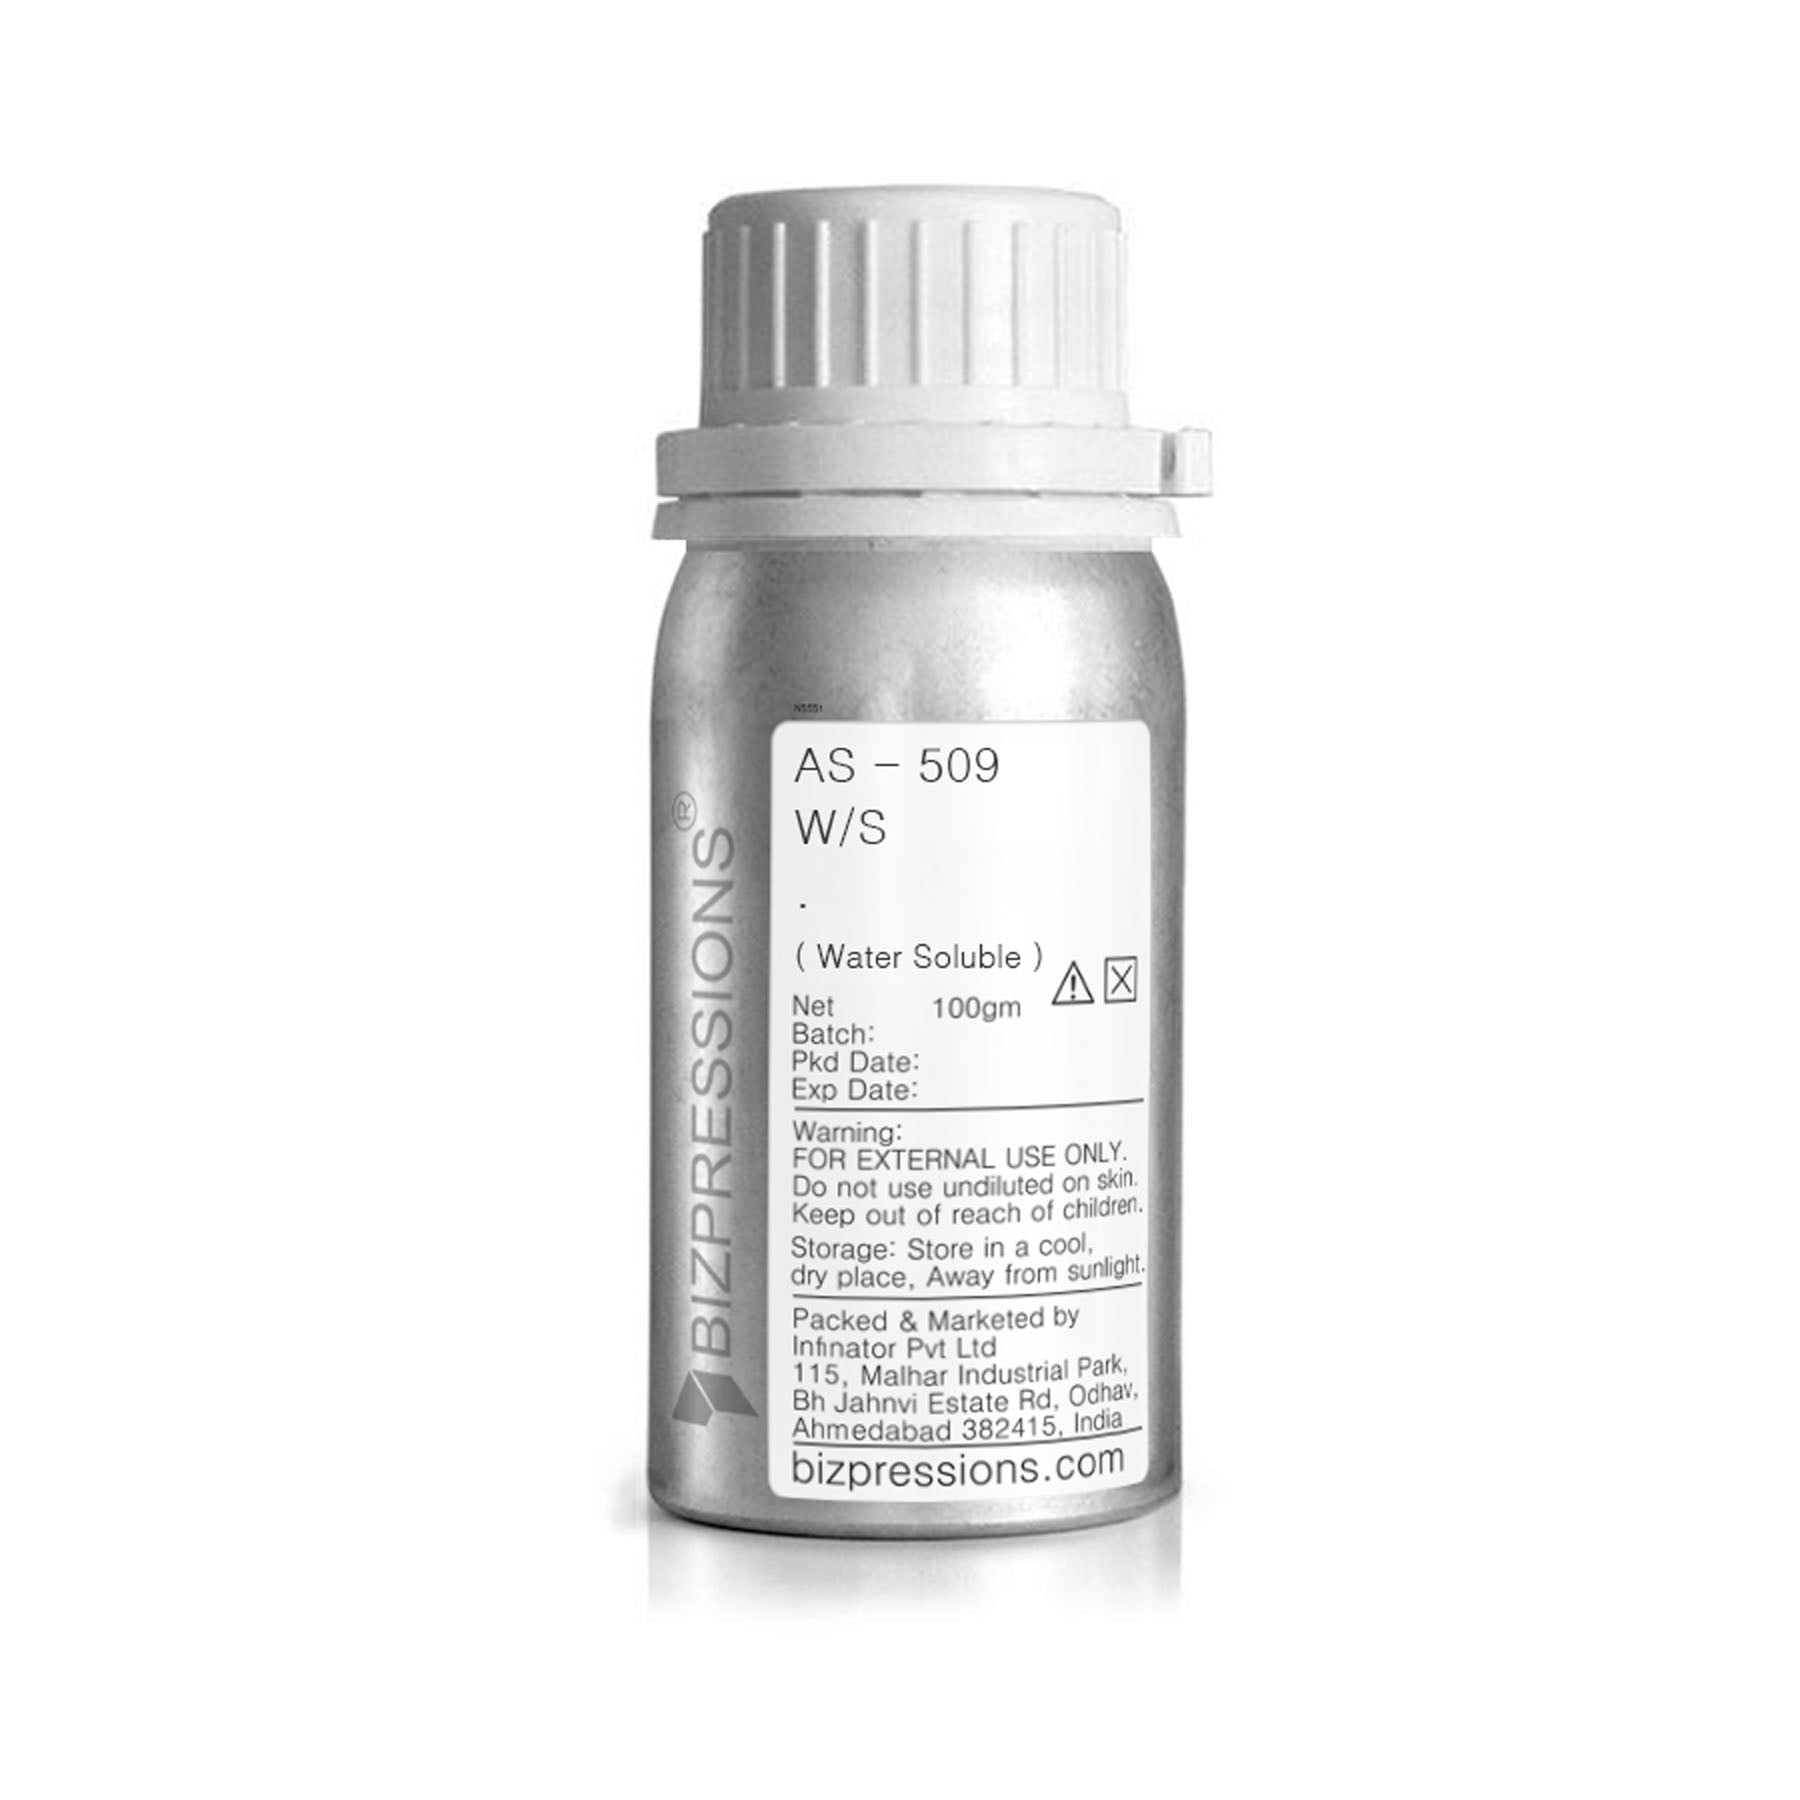 AS - 509 W/S - Fragrance ( Water Soluble ) - 100 gm